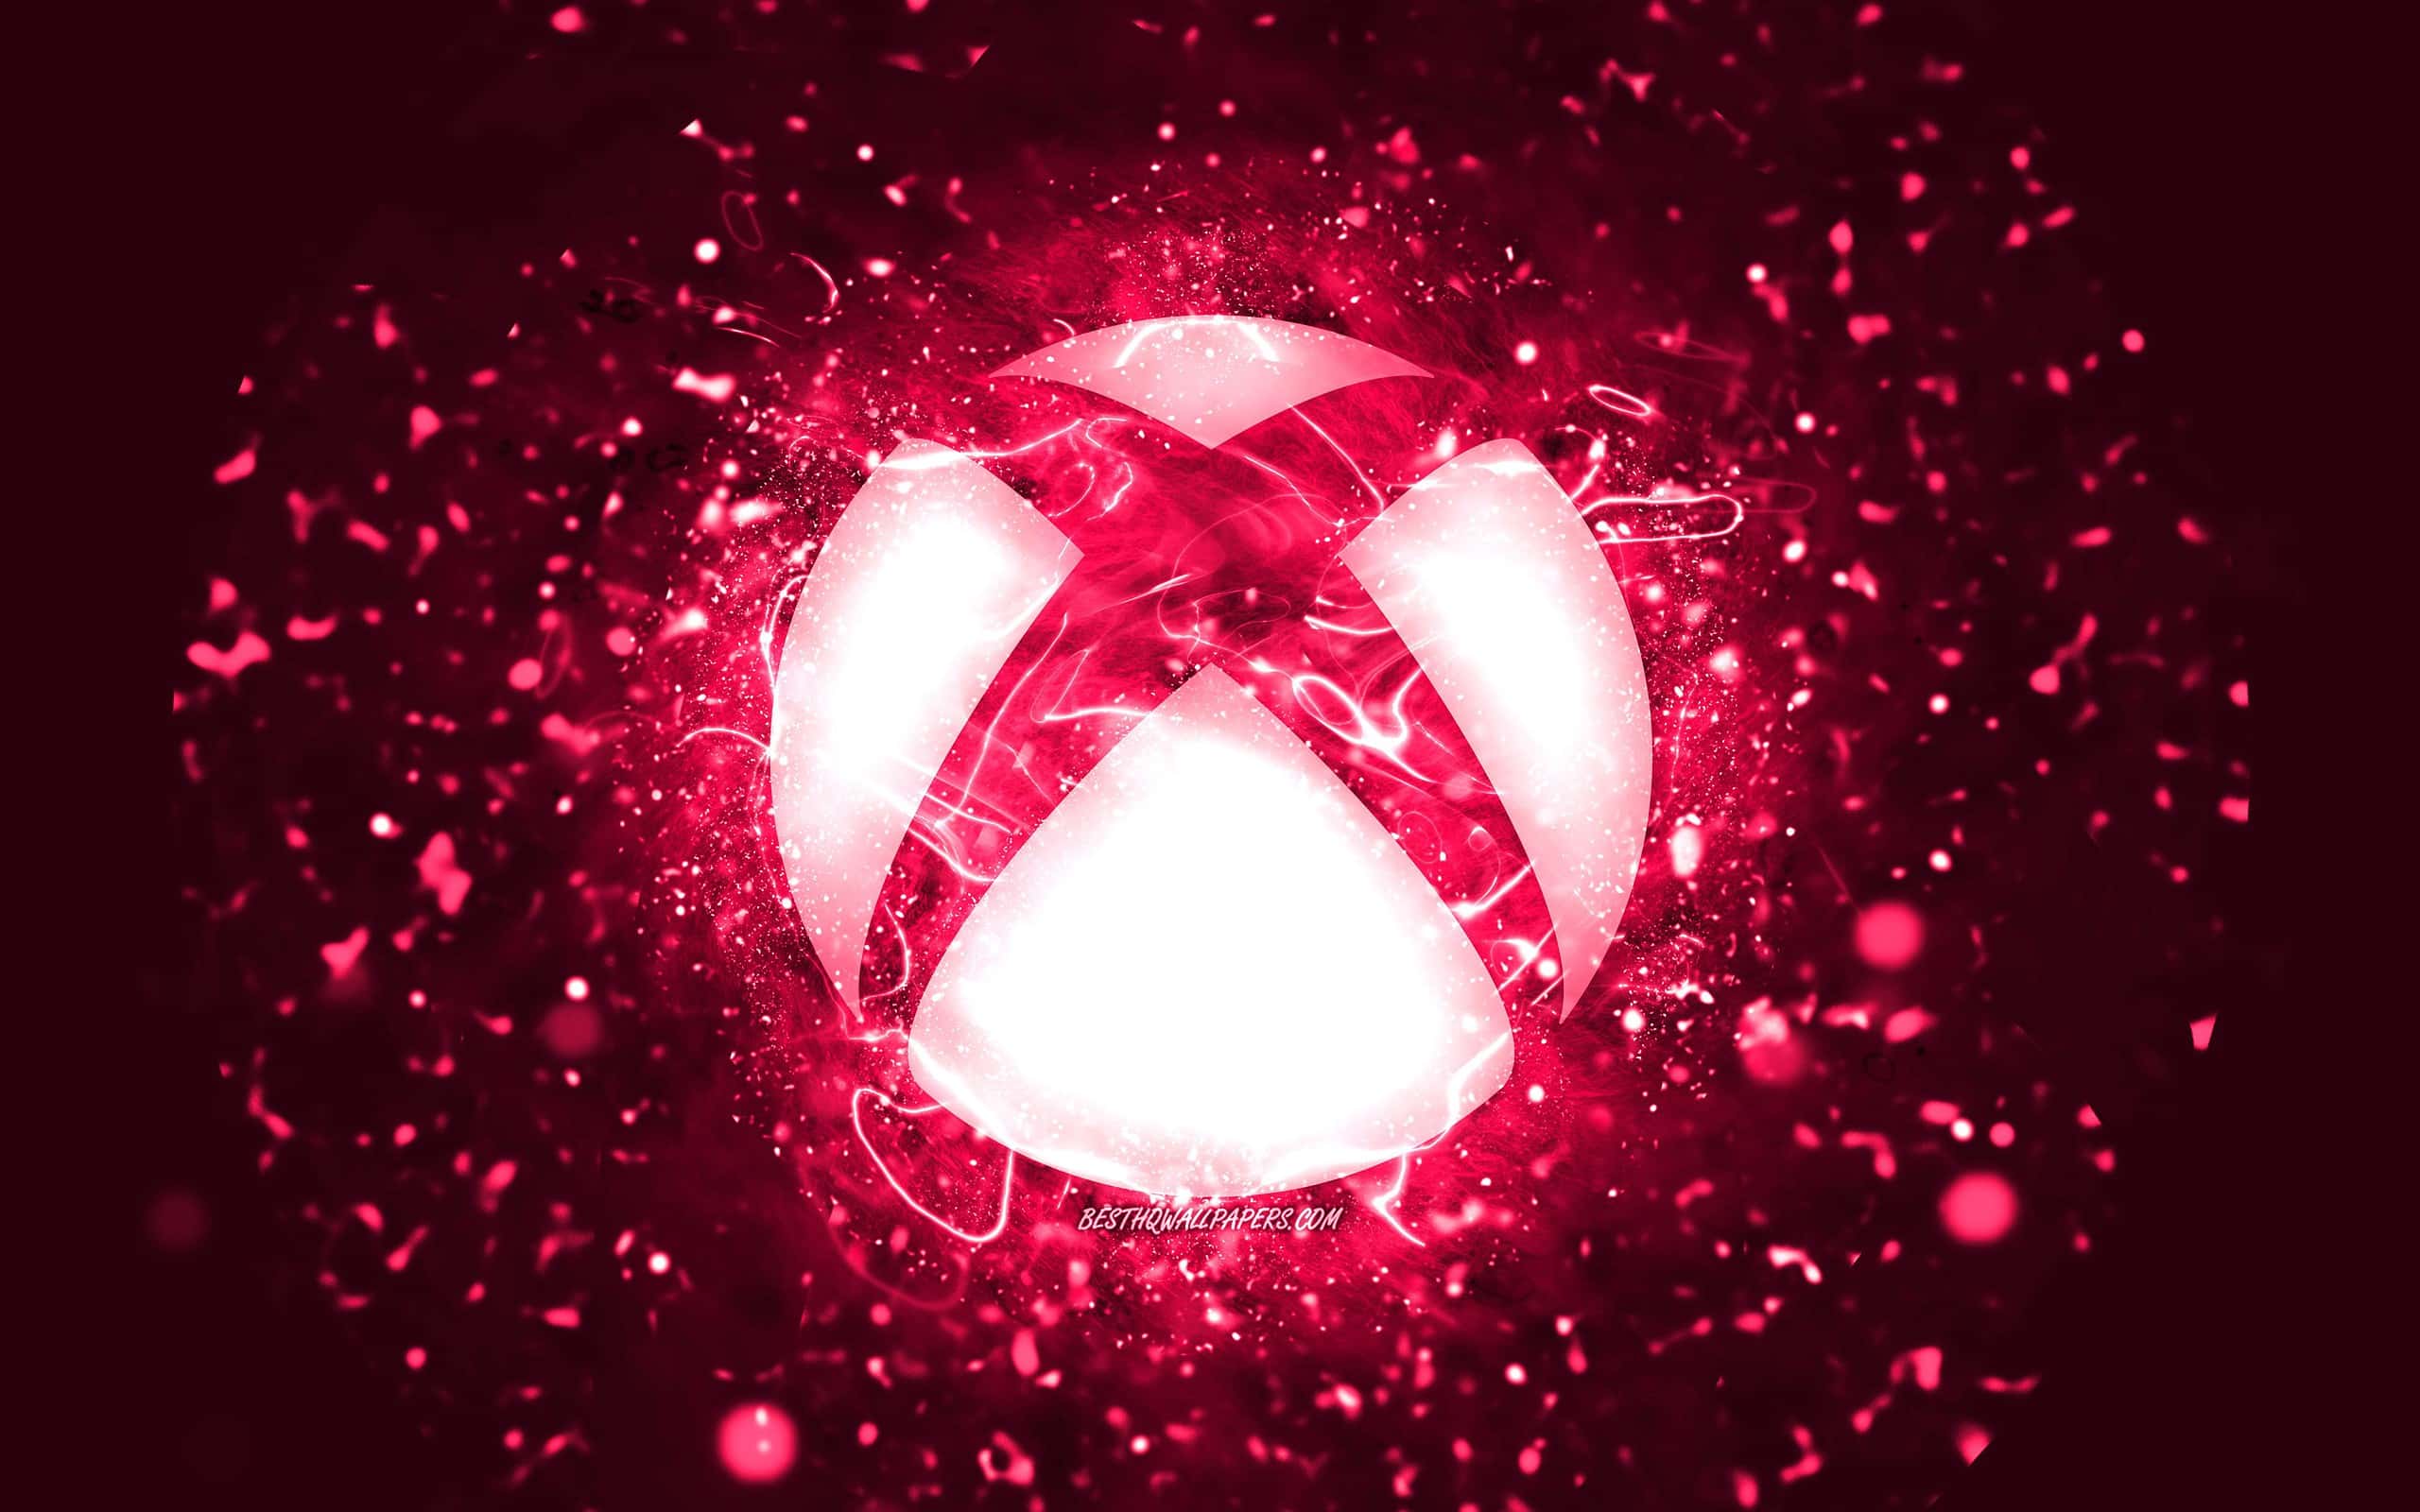 Microsoft reduces Xbox DRM inconvenience in build 2208